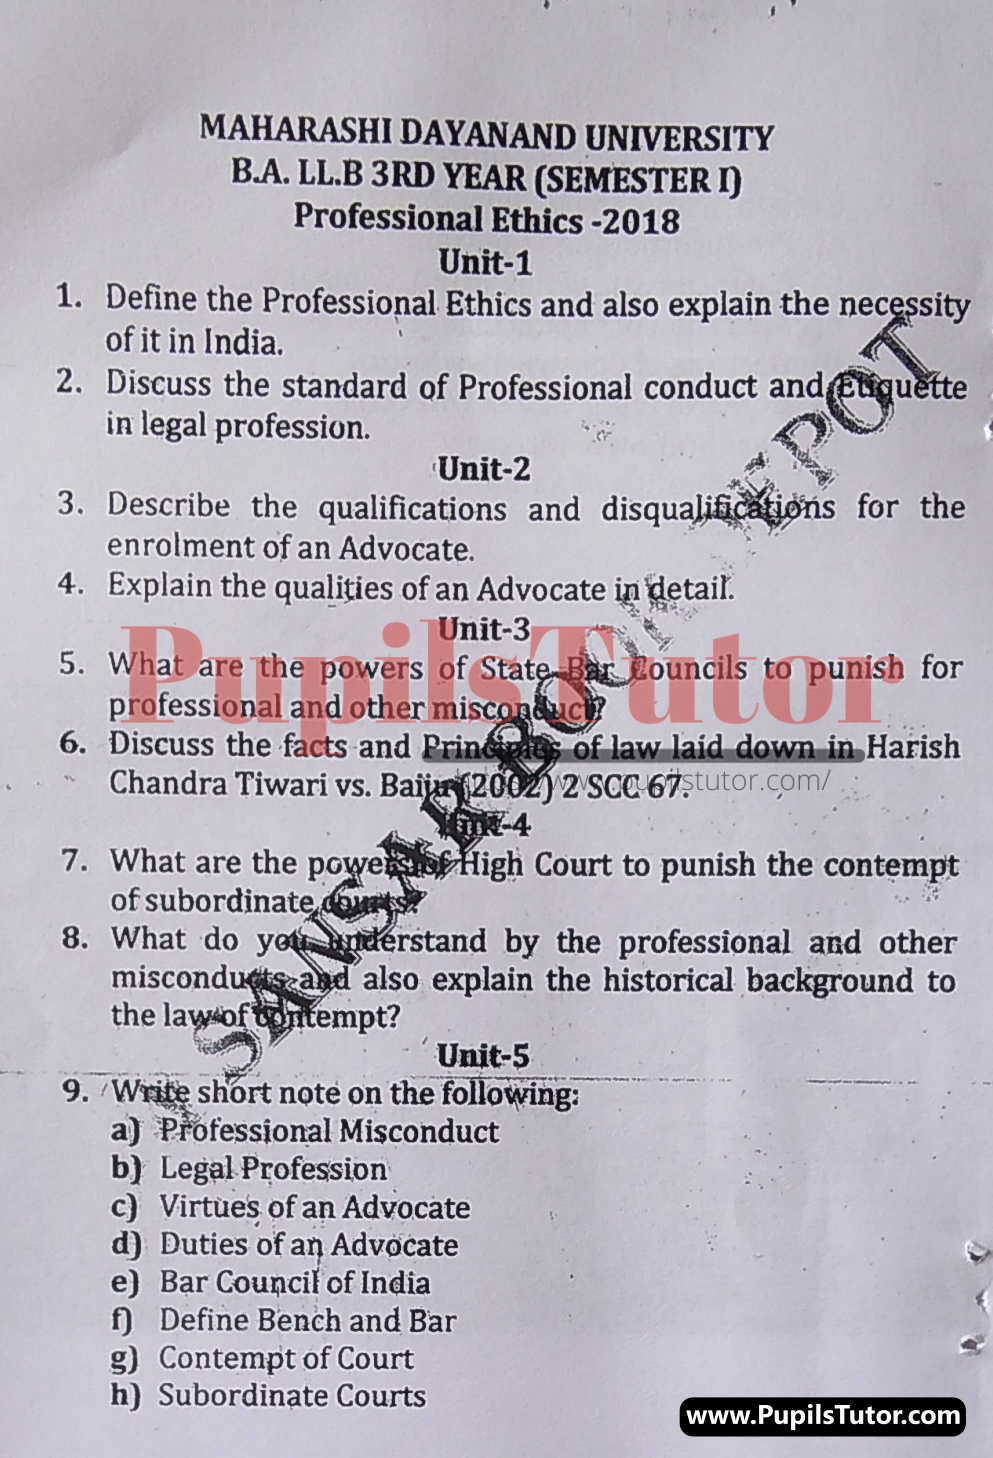 MDU (Maharshi Dayanand University, Rohtak Haryana) LLB Regular Exam (Hons.) First Semester Previous Year Professional Ethic Question Paper For 2018 Exam (Question Paper Page 1) - pupilstutor.com